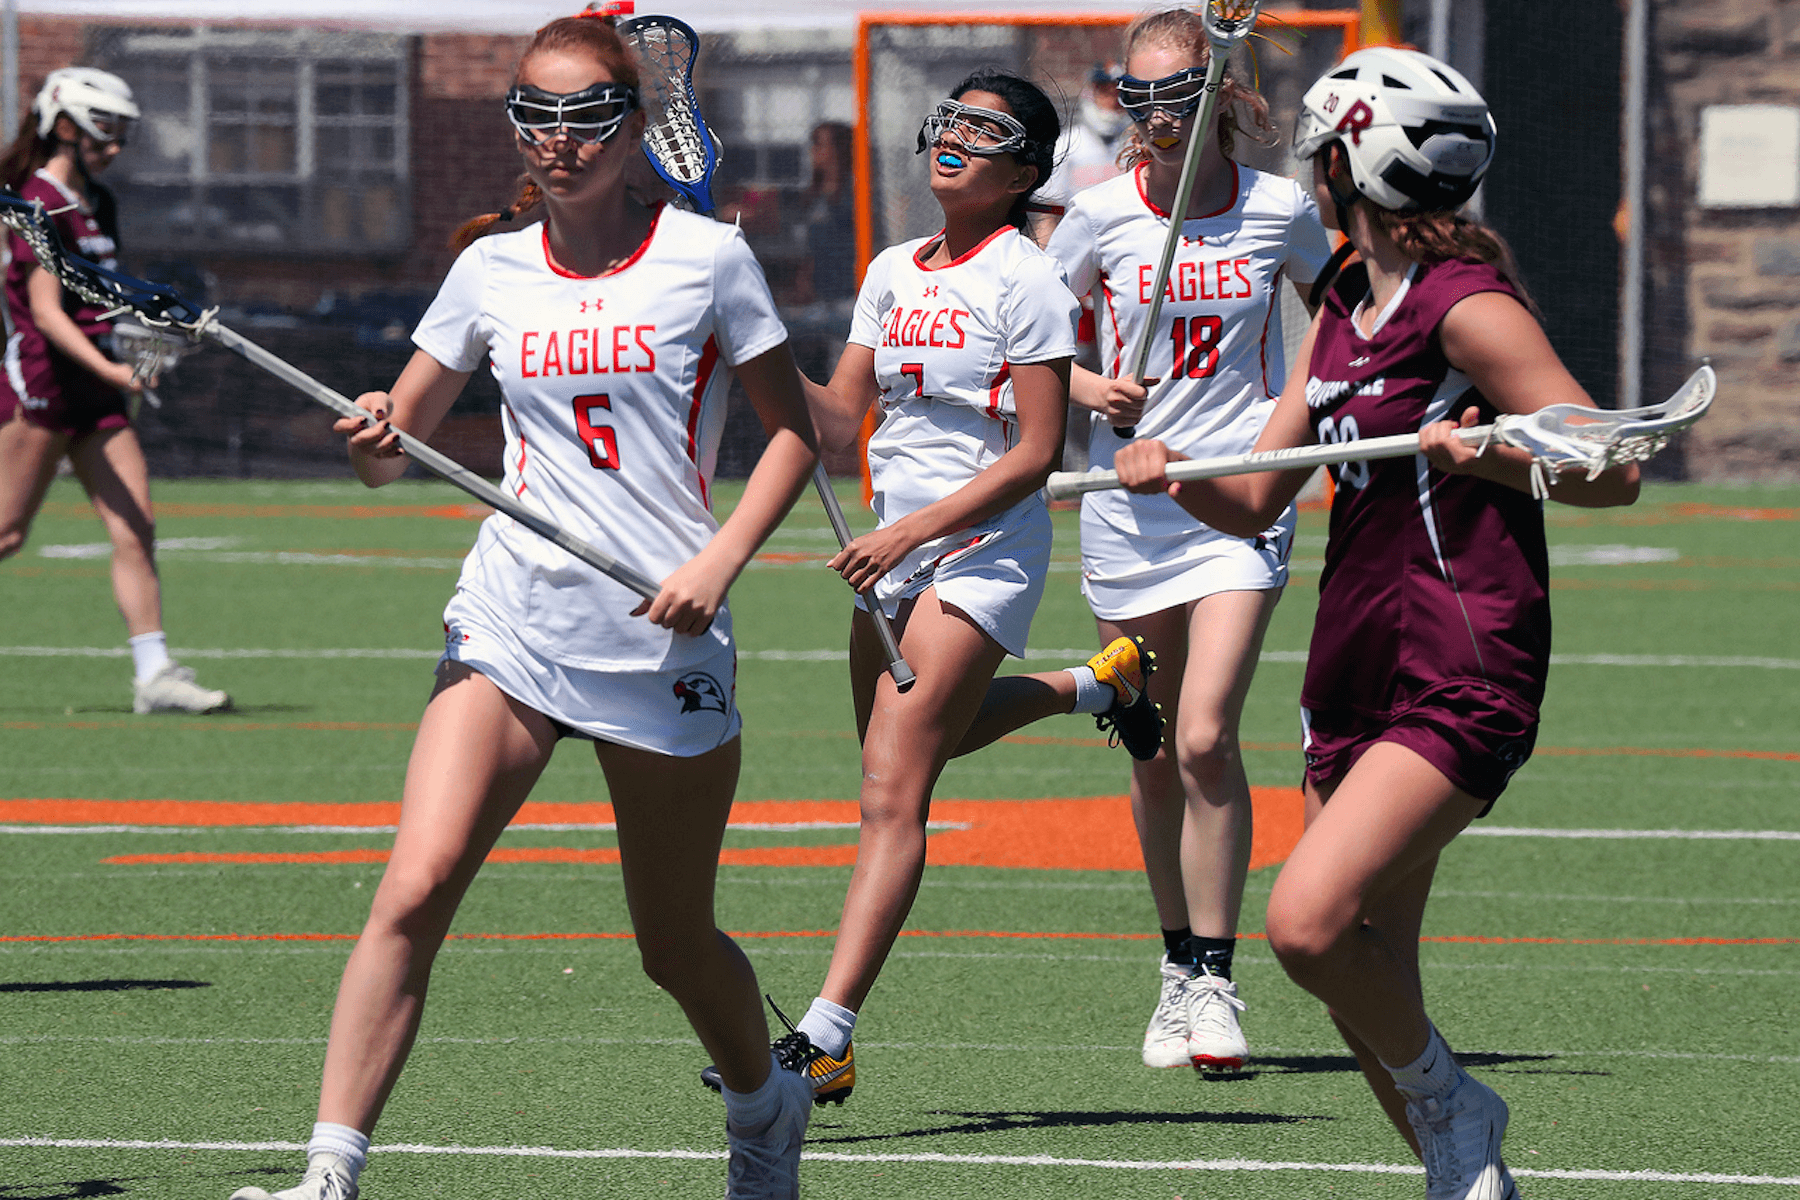 Ethical Culture Fieldston lacrosse players participate at Spring Fling.